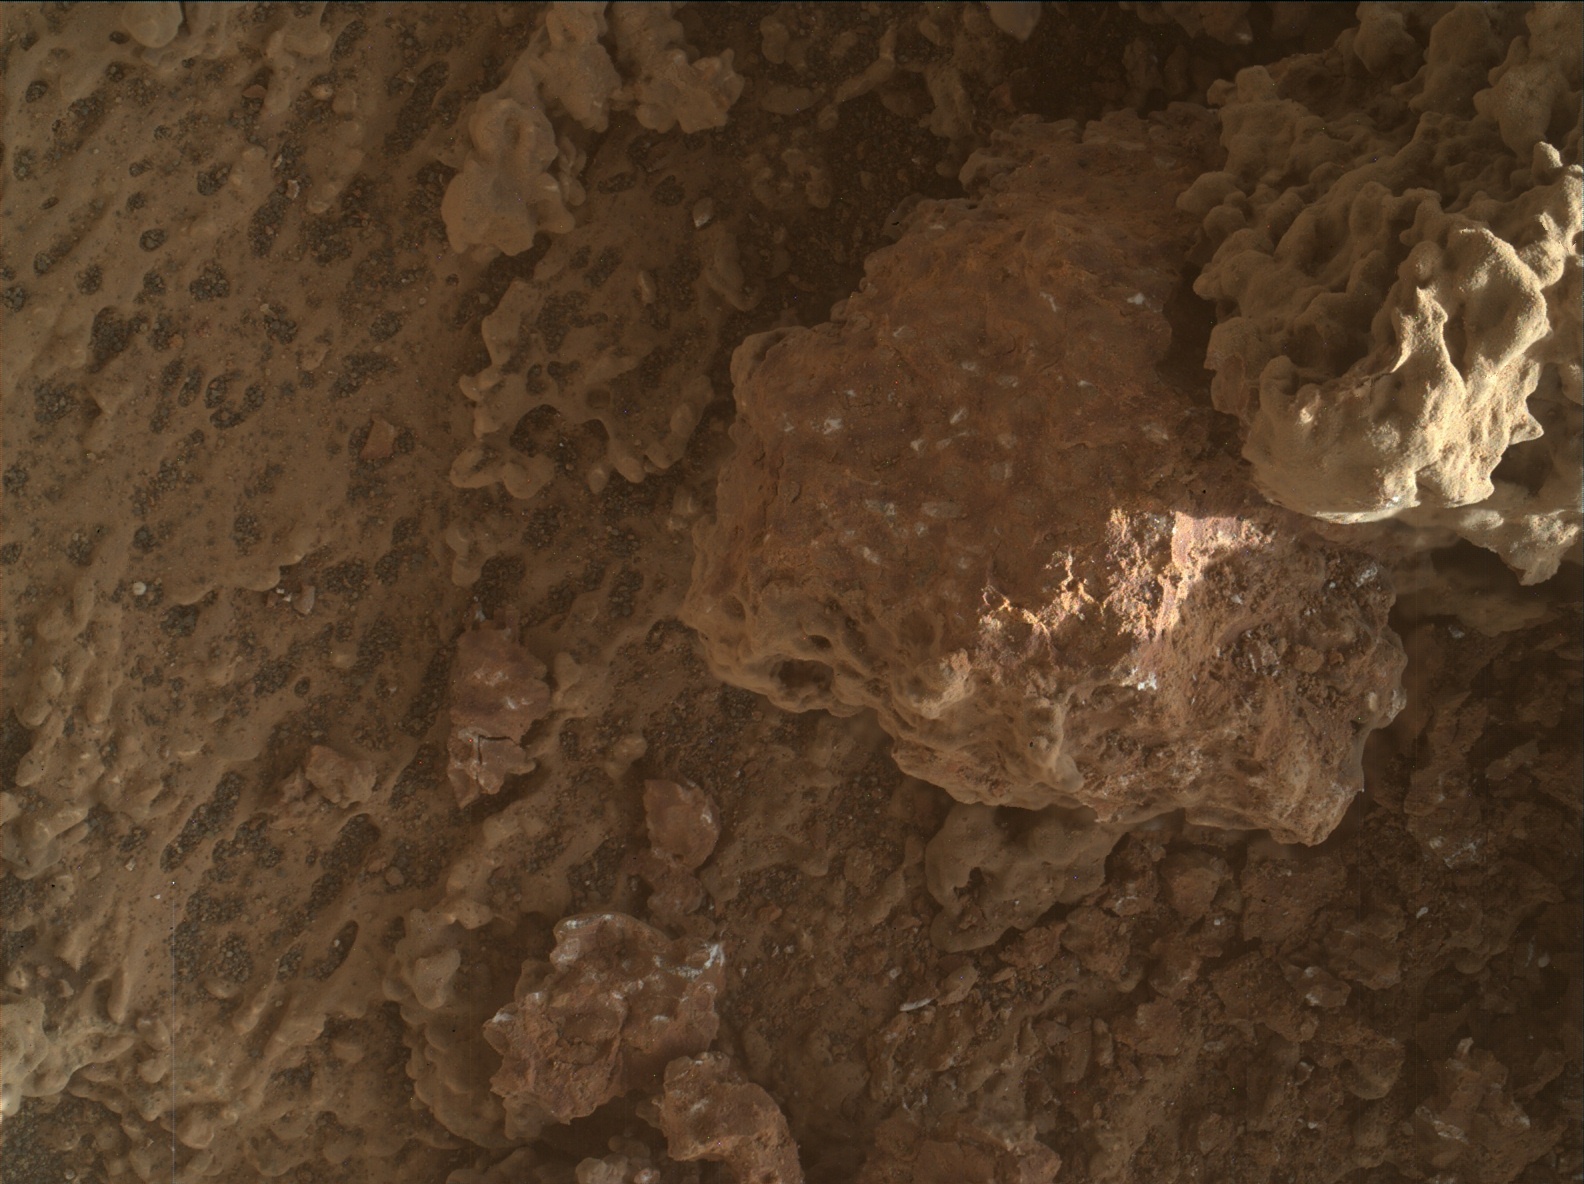 Nasa's Mars rover Curiosity acquired this image using its Mars Hand Lens Imager (MAHLI) on Sol 3273